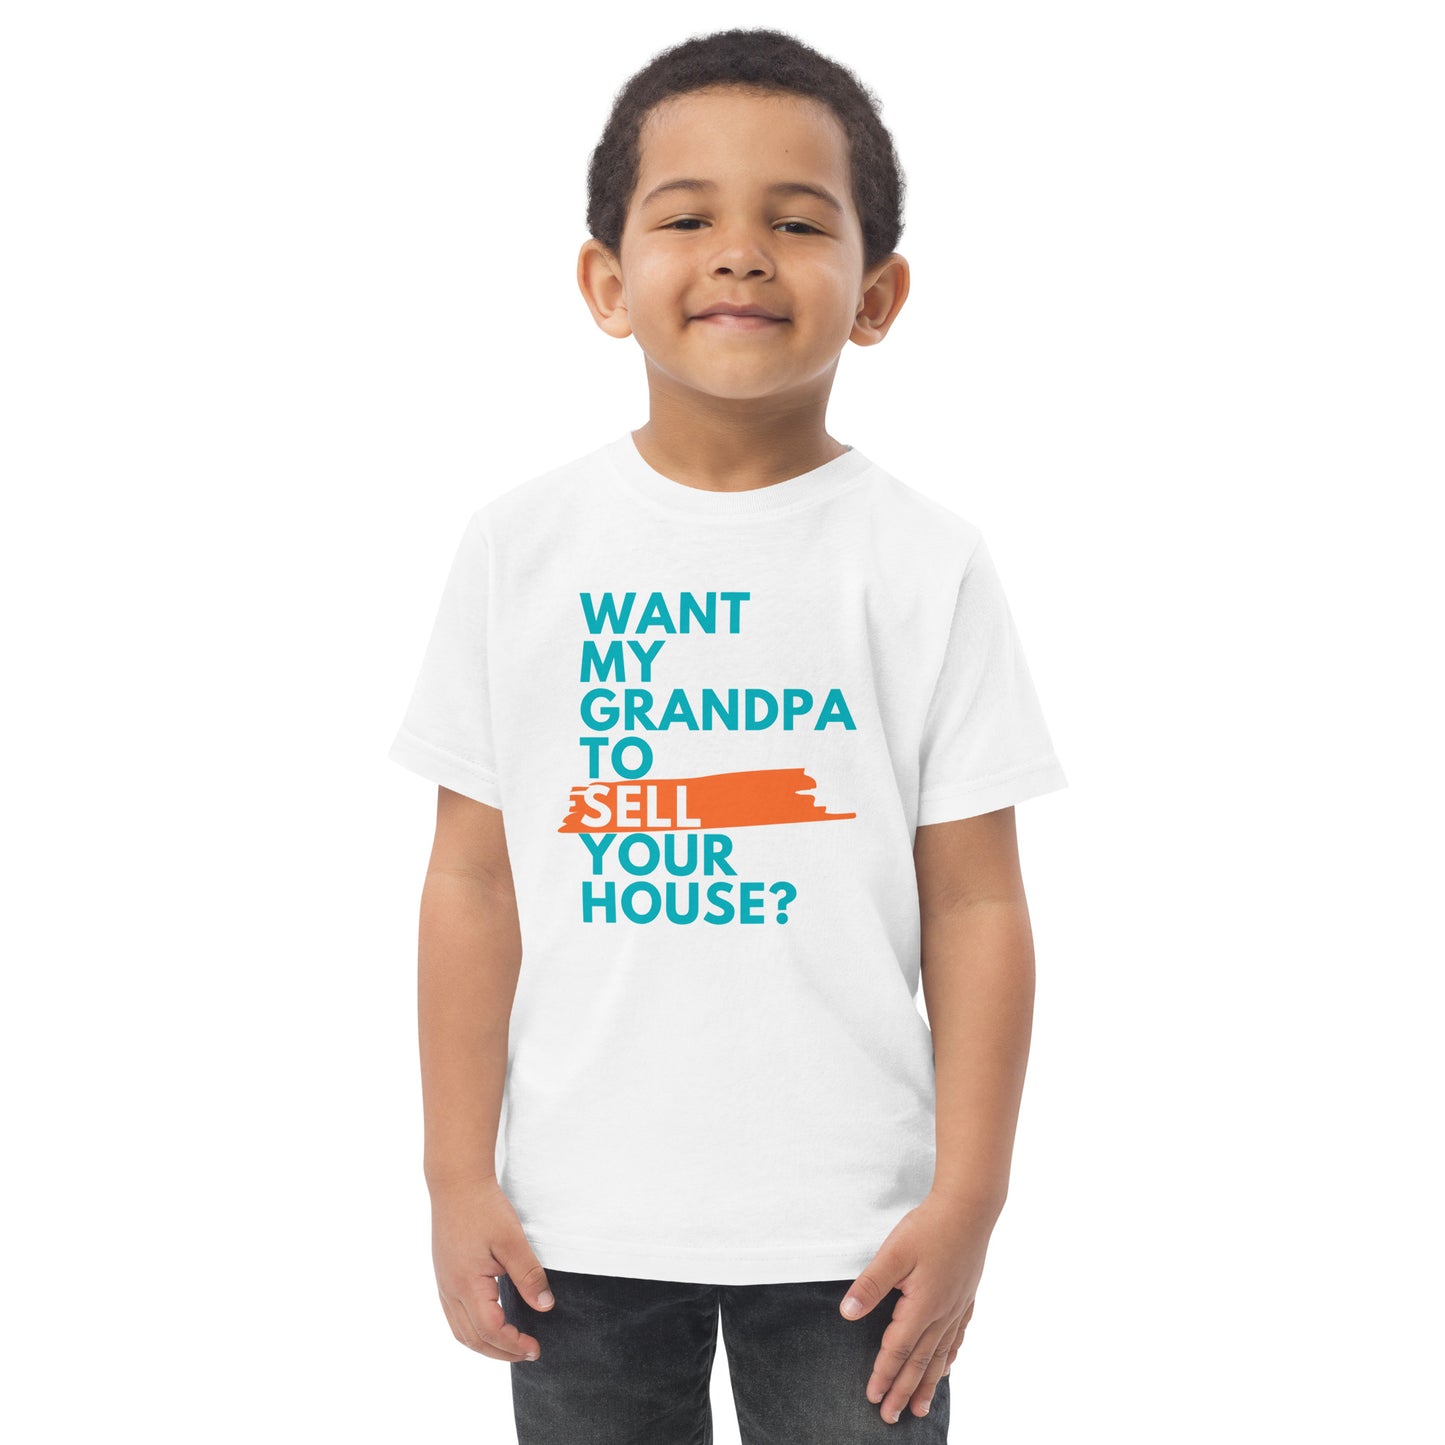 Granspa Sell 2T-6 Toddler jersey t-shirt